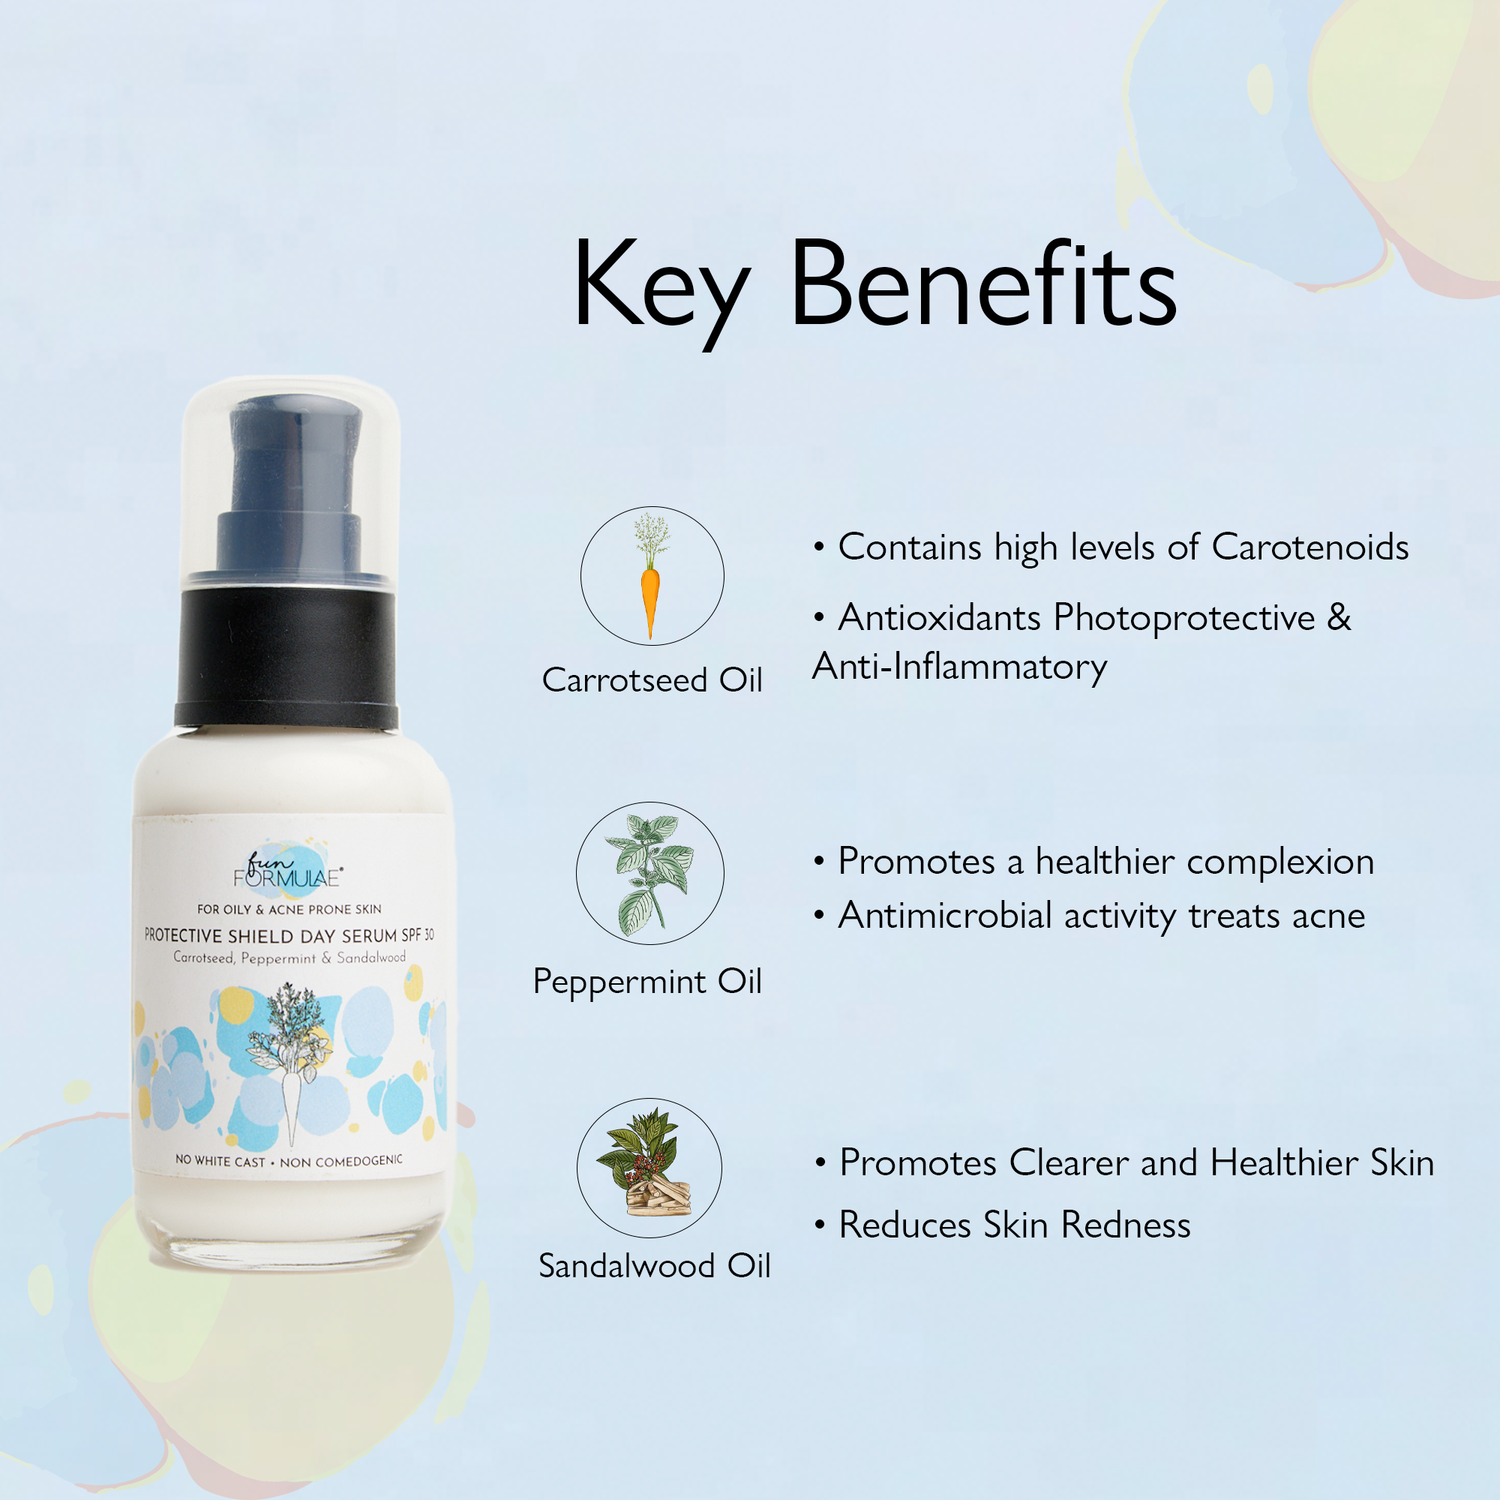 Sun Tan Protective Day Serum | SPF 30 | For Normal , Oily and Acne Prone Skin | 50 ml